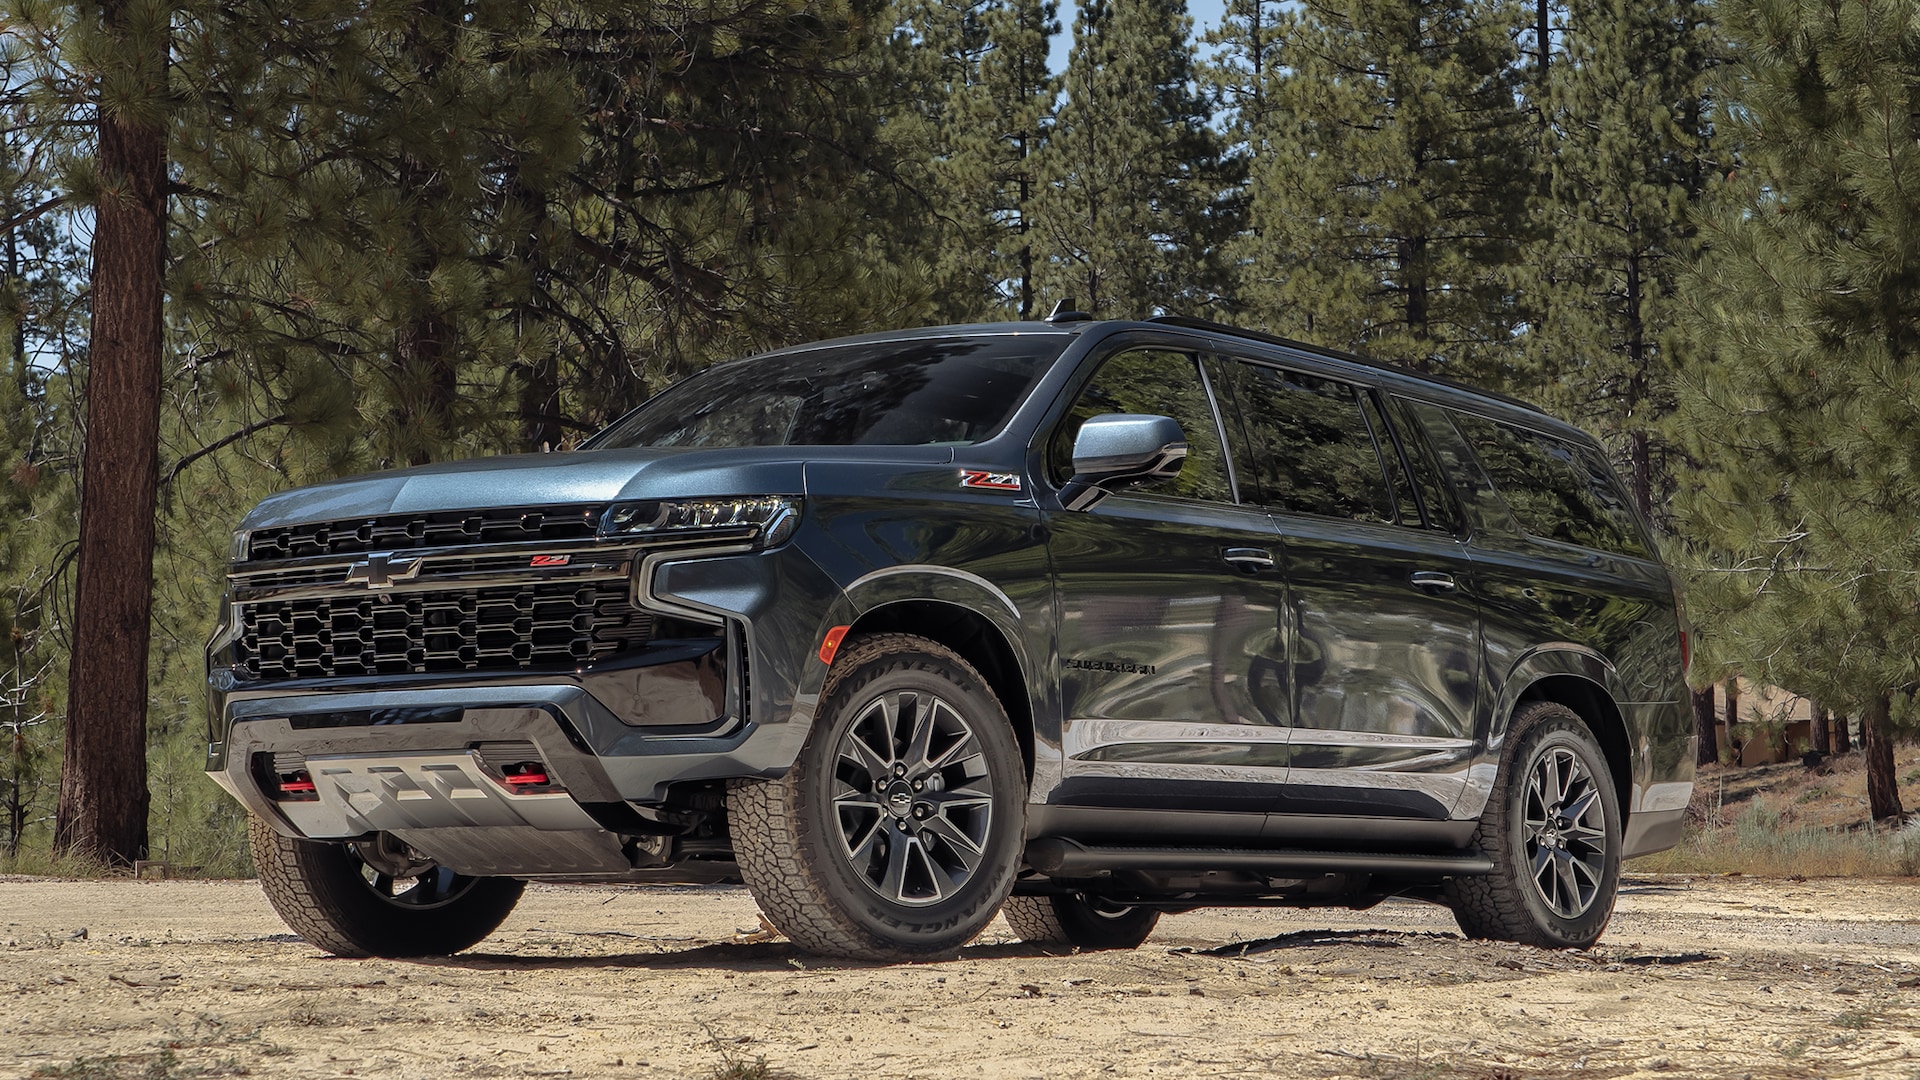 2021 Chevrolet Suburban Z71 First Drive Review: Keep Polishing